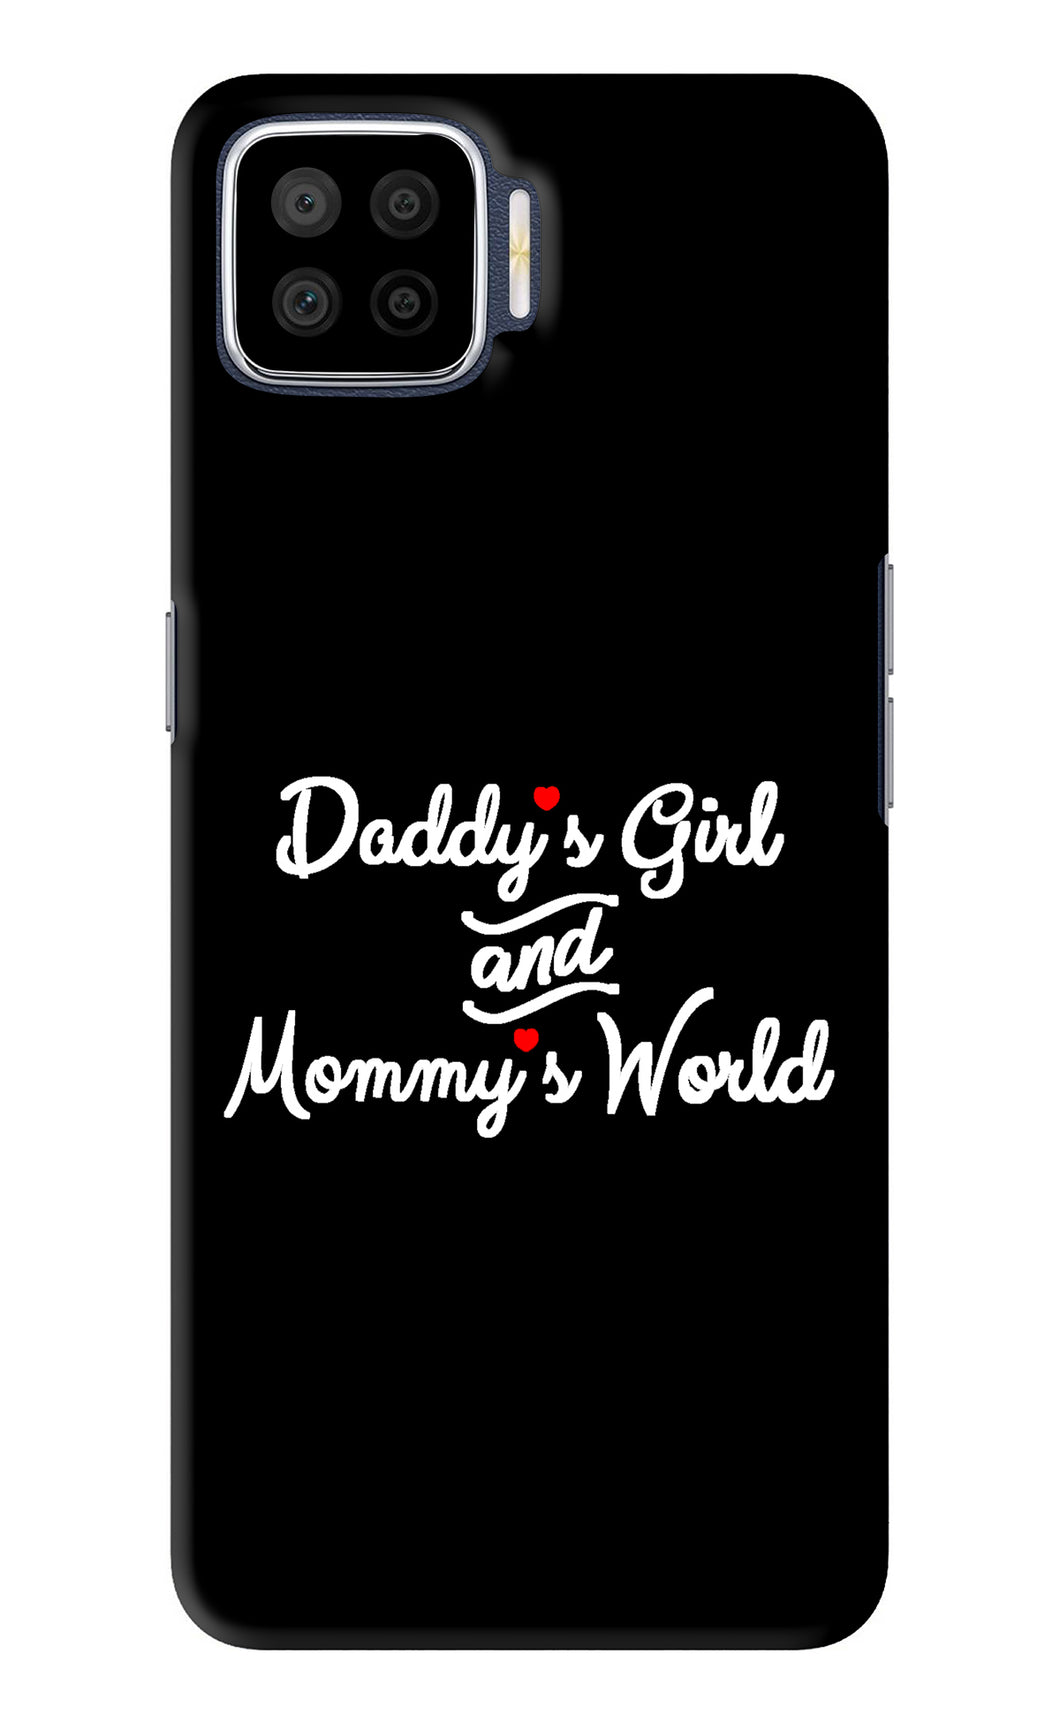 Daddy's Girl and Mommy's World Oppo F17 Back Skin Wrap